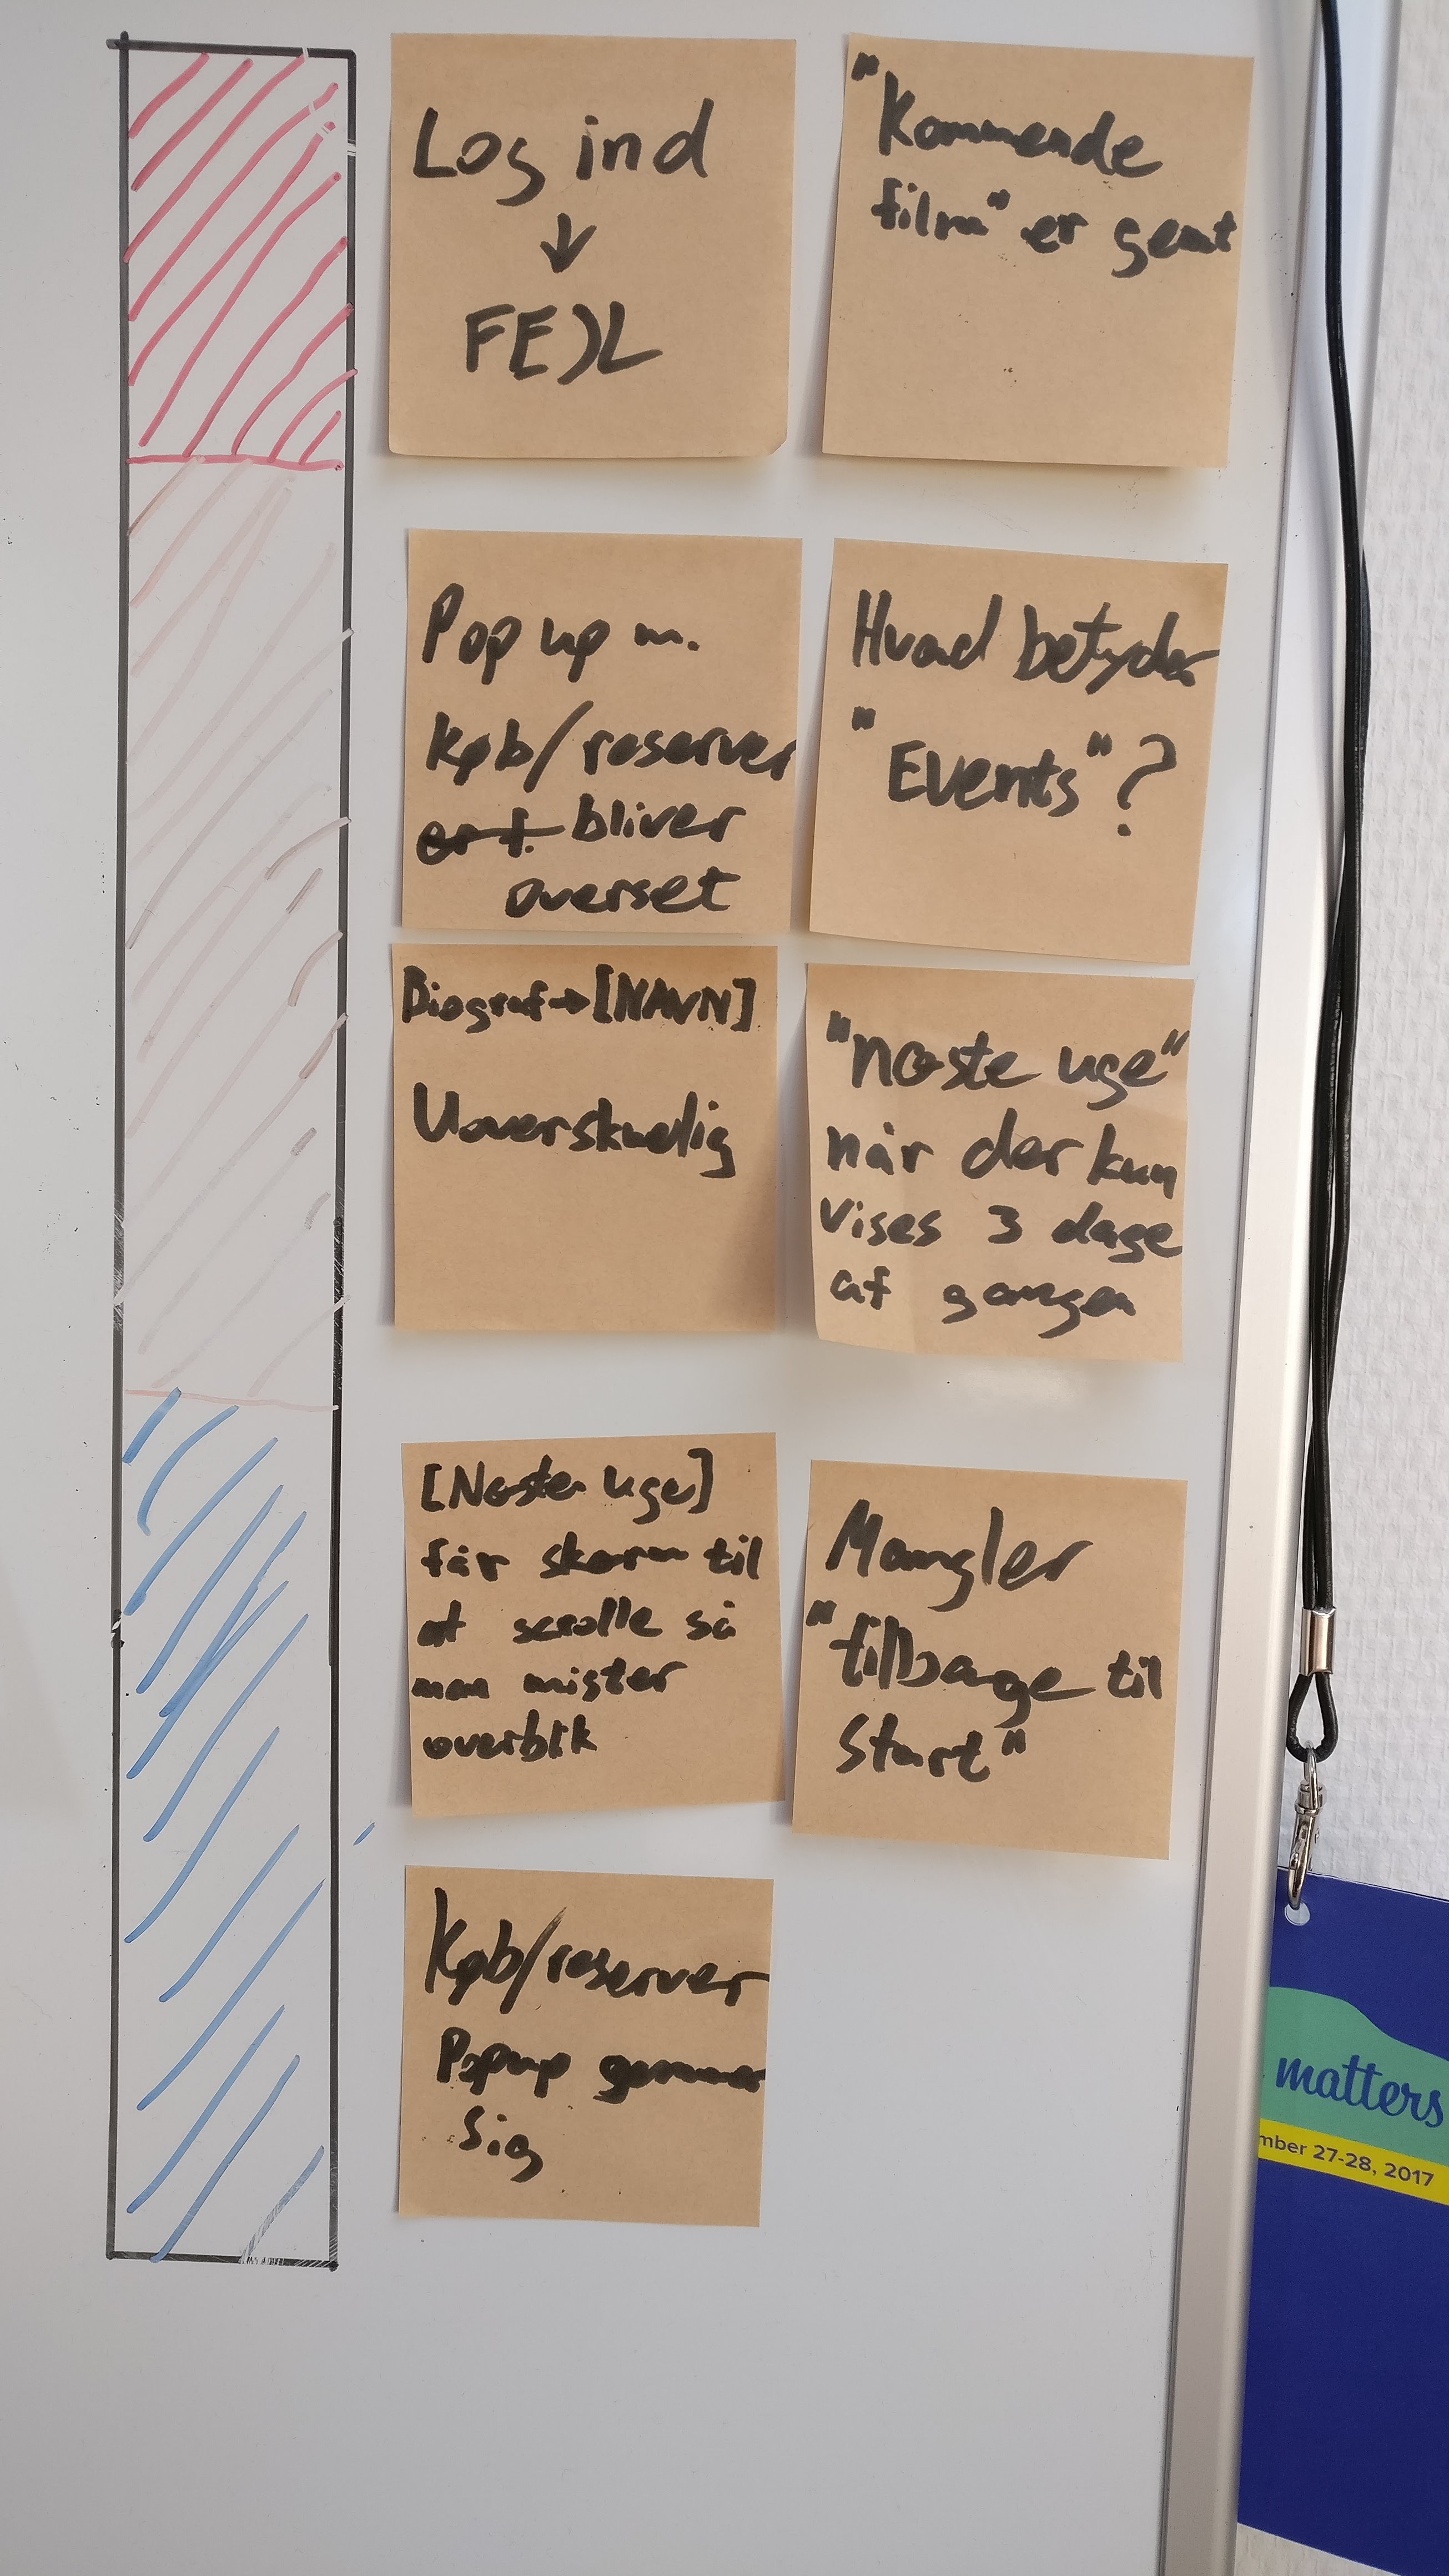 A picture of the most prominent issues, on post-its